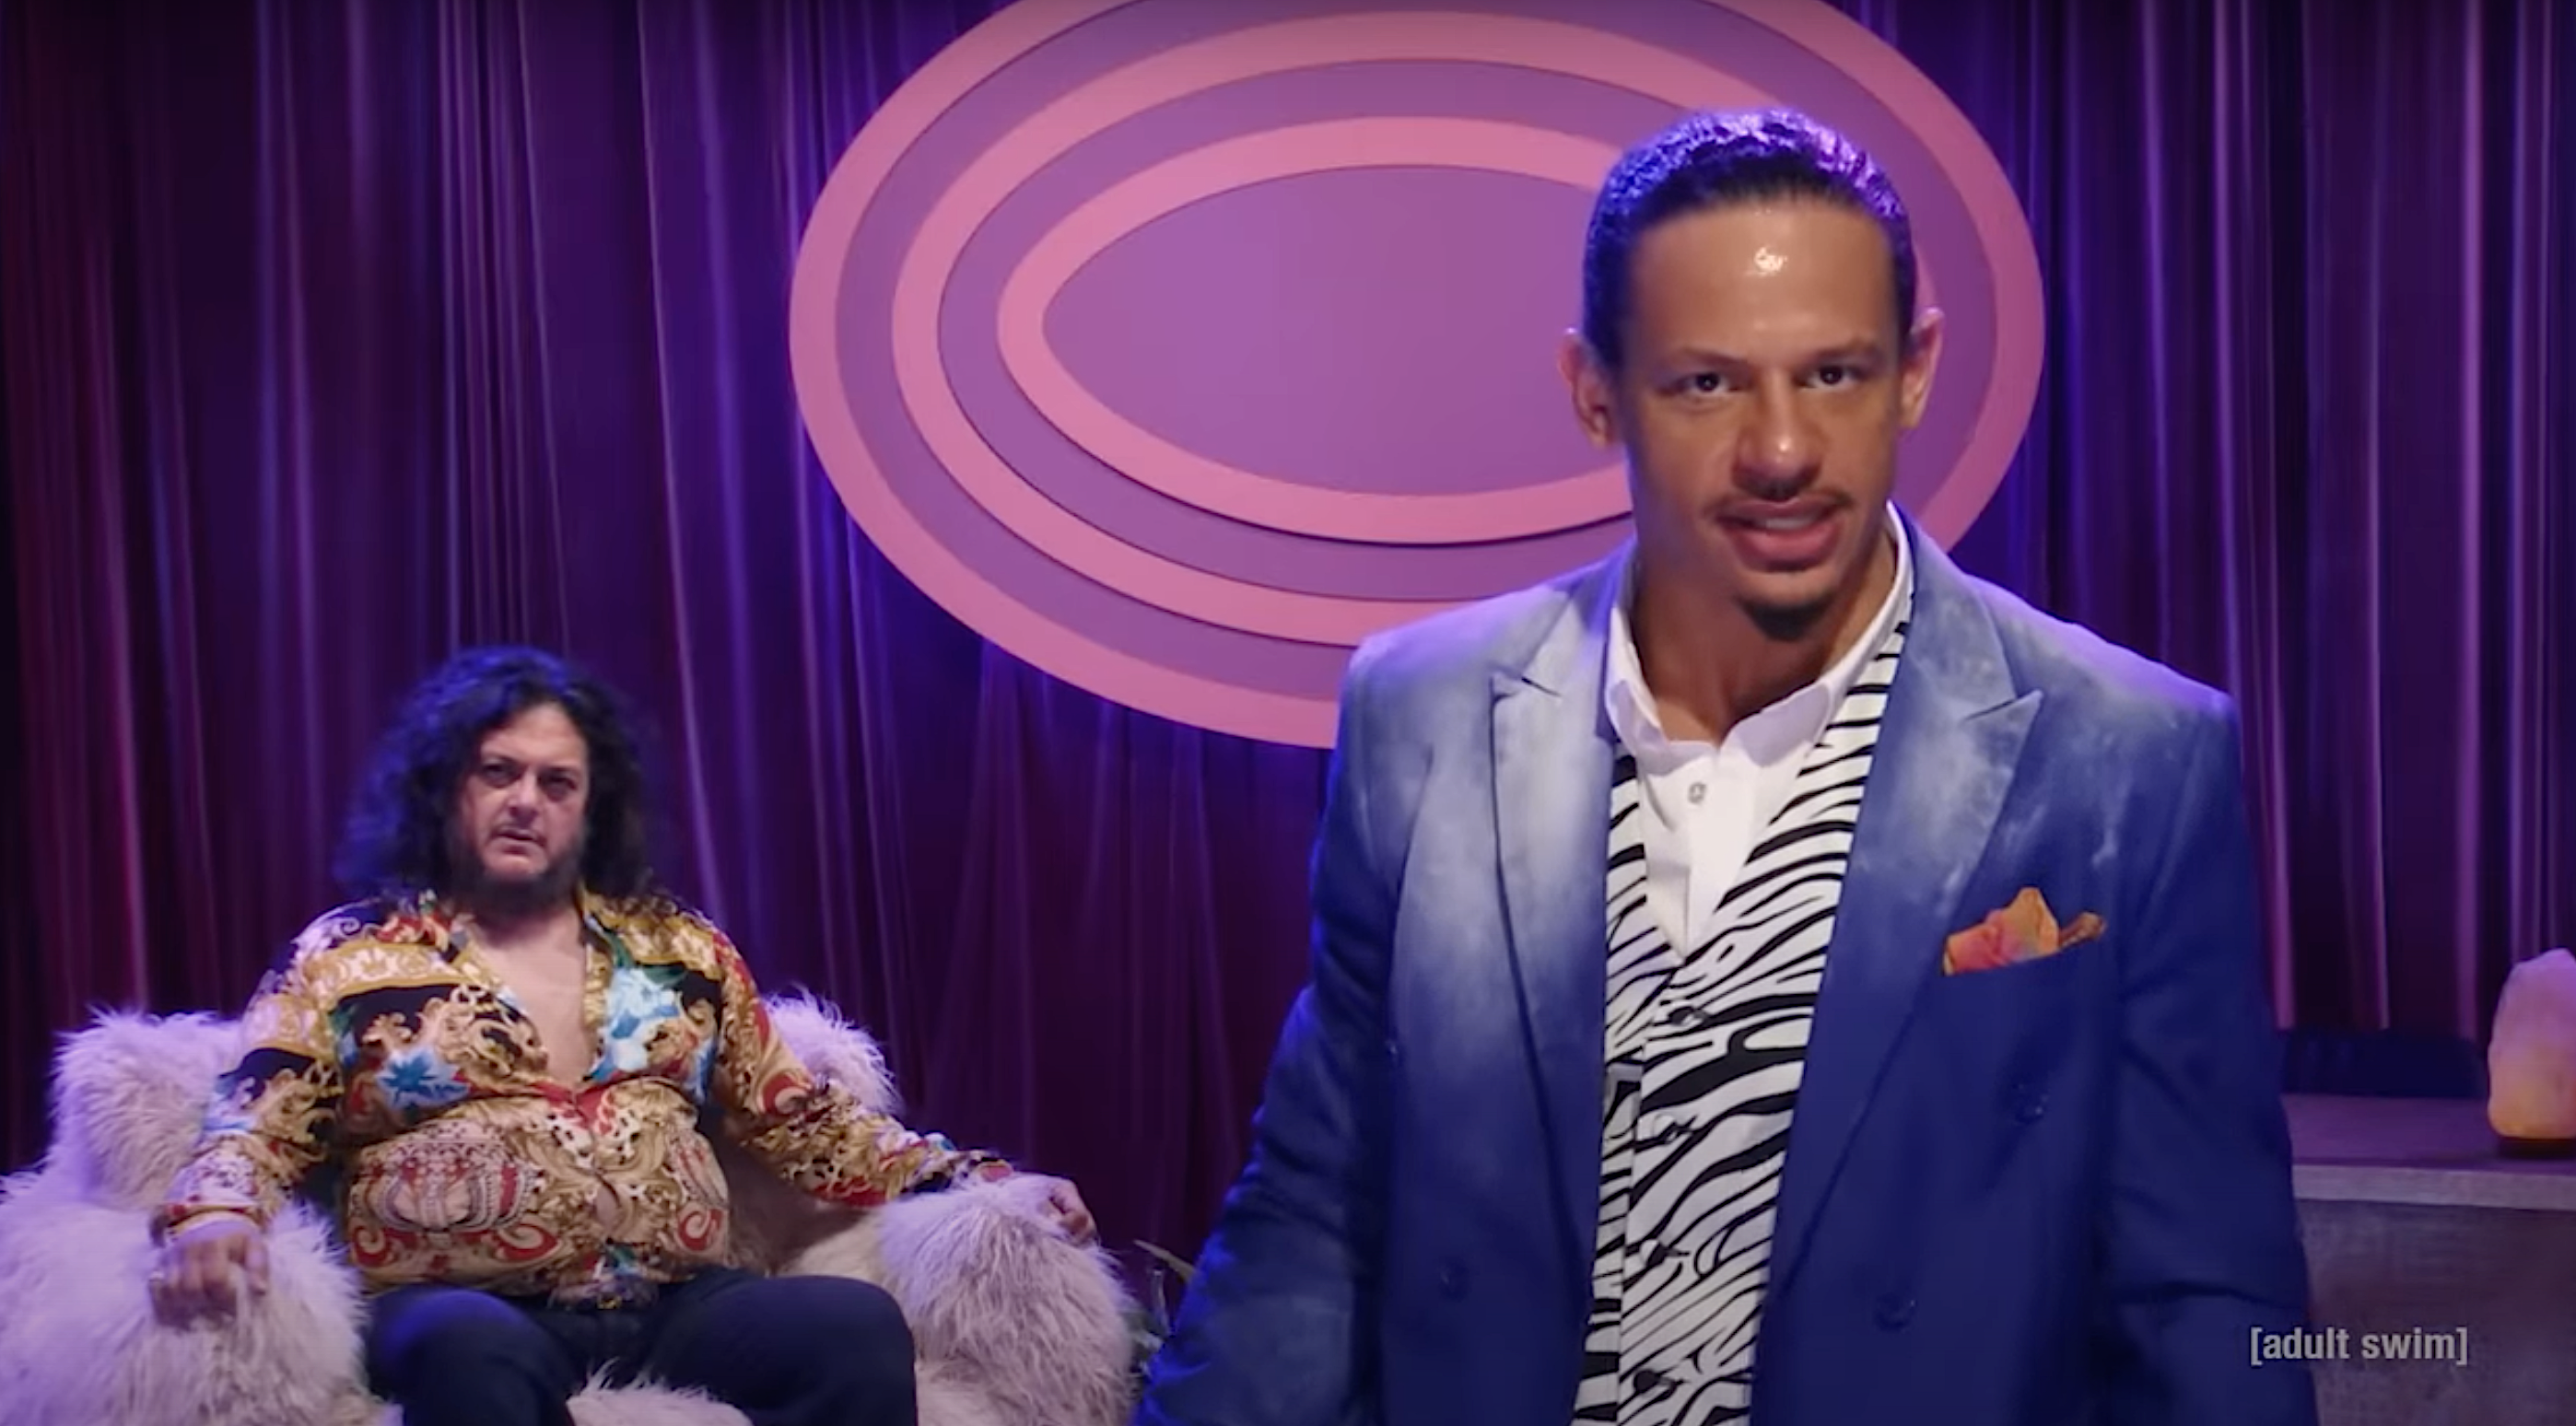 How to watch The Eric Andre Show season 6 premiere, where to stream